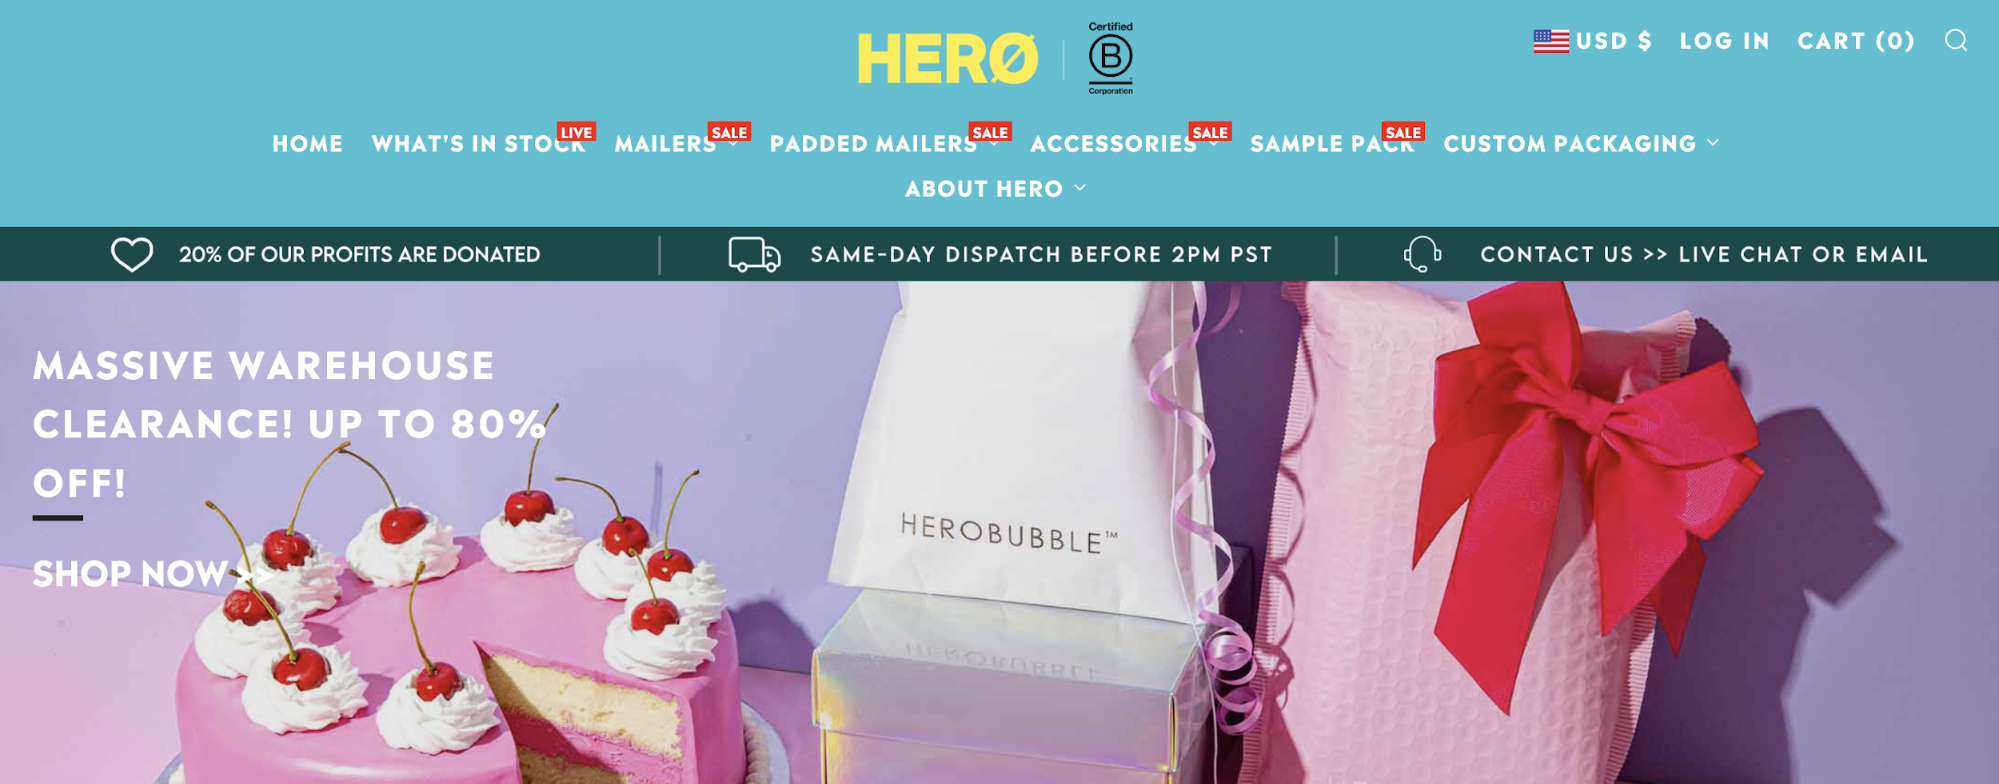 Hero Packaging website featuring a pink cake with a slice cut out and matching gift packaging